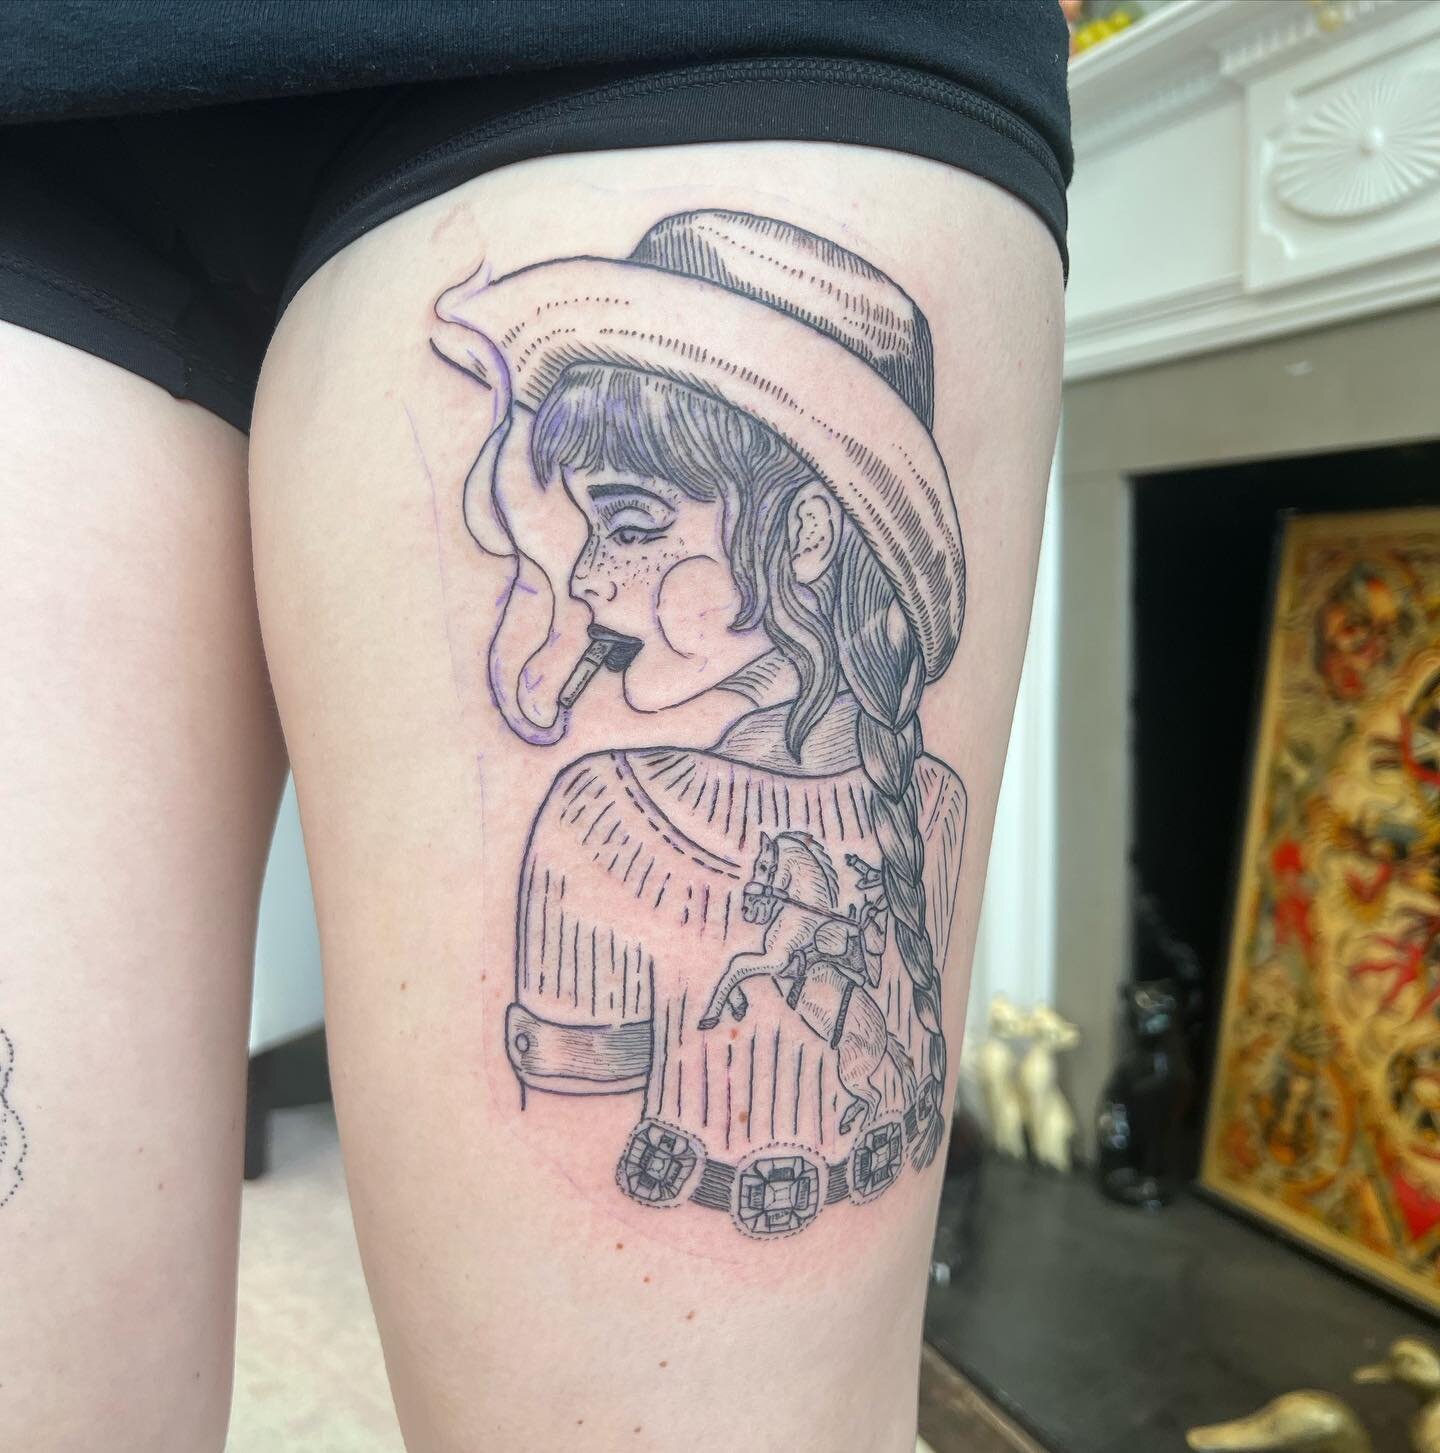 Let&rsquo;s go girls *kicks down a door*

By our rootinest tootinest cowpoke @themutemaker 

In Love Tattoo 1130 Burke St. Winston-Salem #nctattooer #nctattooers #vegan #vegantattooer #vegantattooers #nctattoo #dtwsnc #wsnclocal #wsncsmallbusiness #n